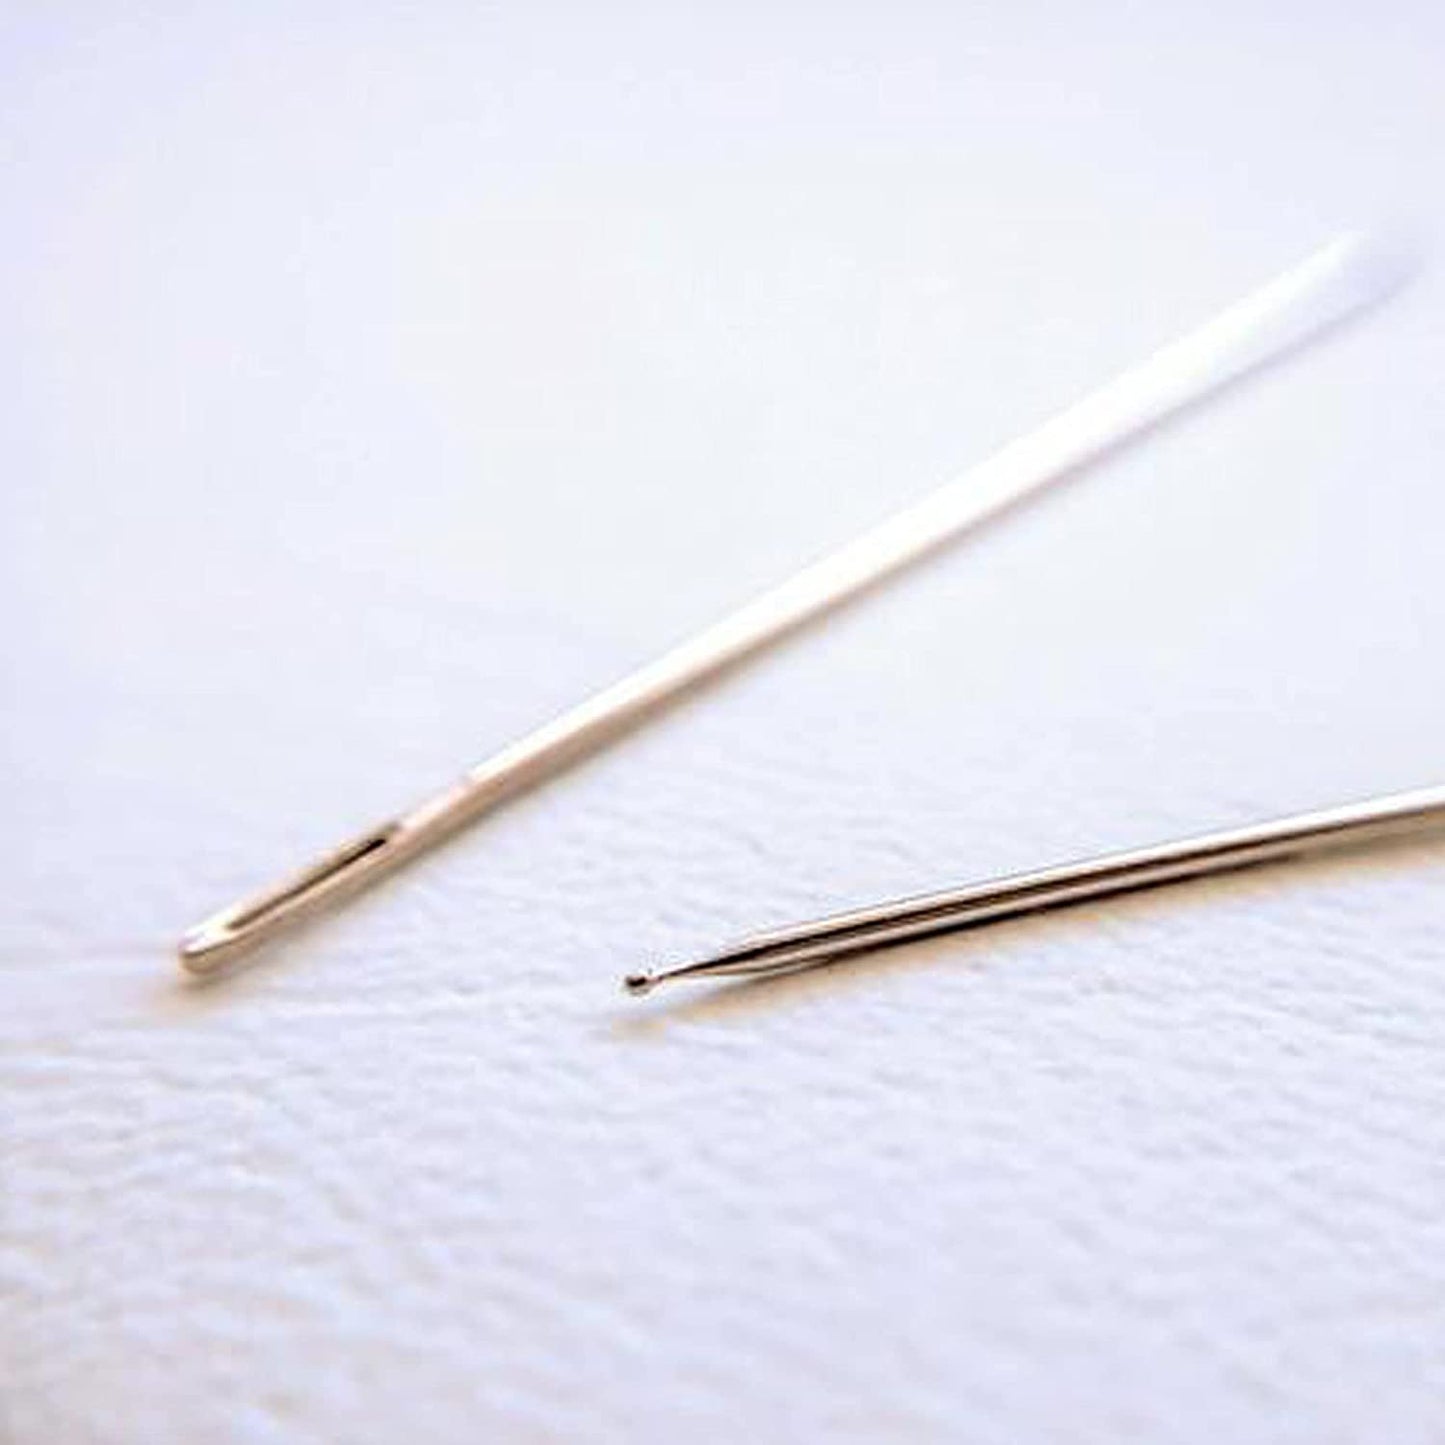 The Easy Guide Ball-Tip Needles No. 26 for Tapestry and Cross Stitch from Sullivans Needles: 2 Needles Imported Germany